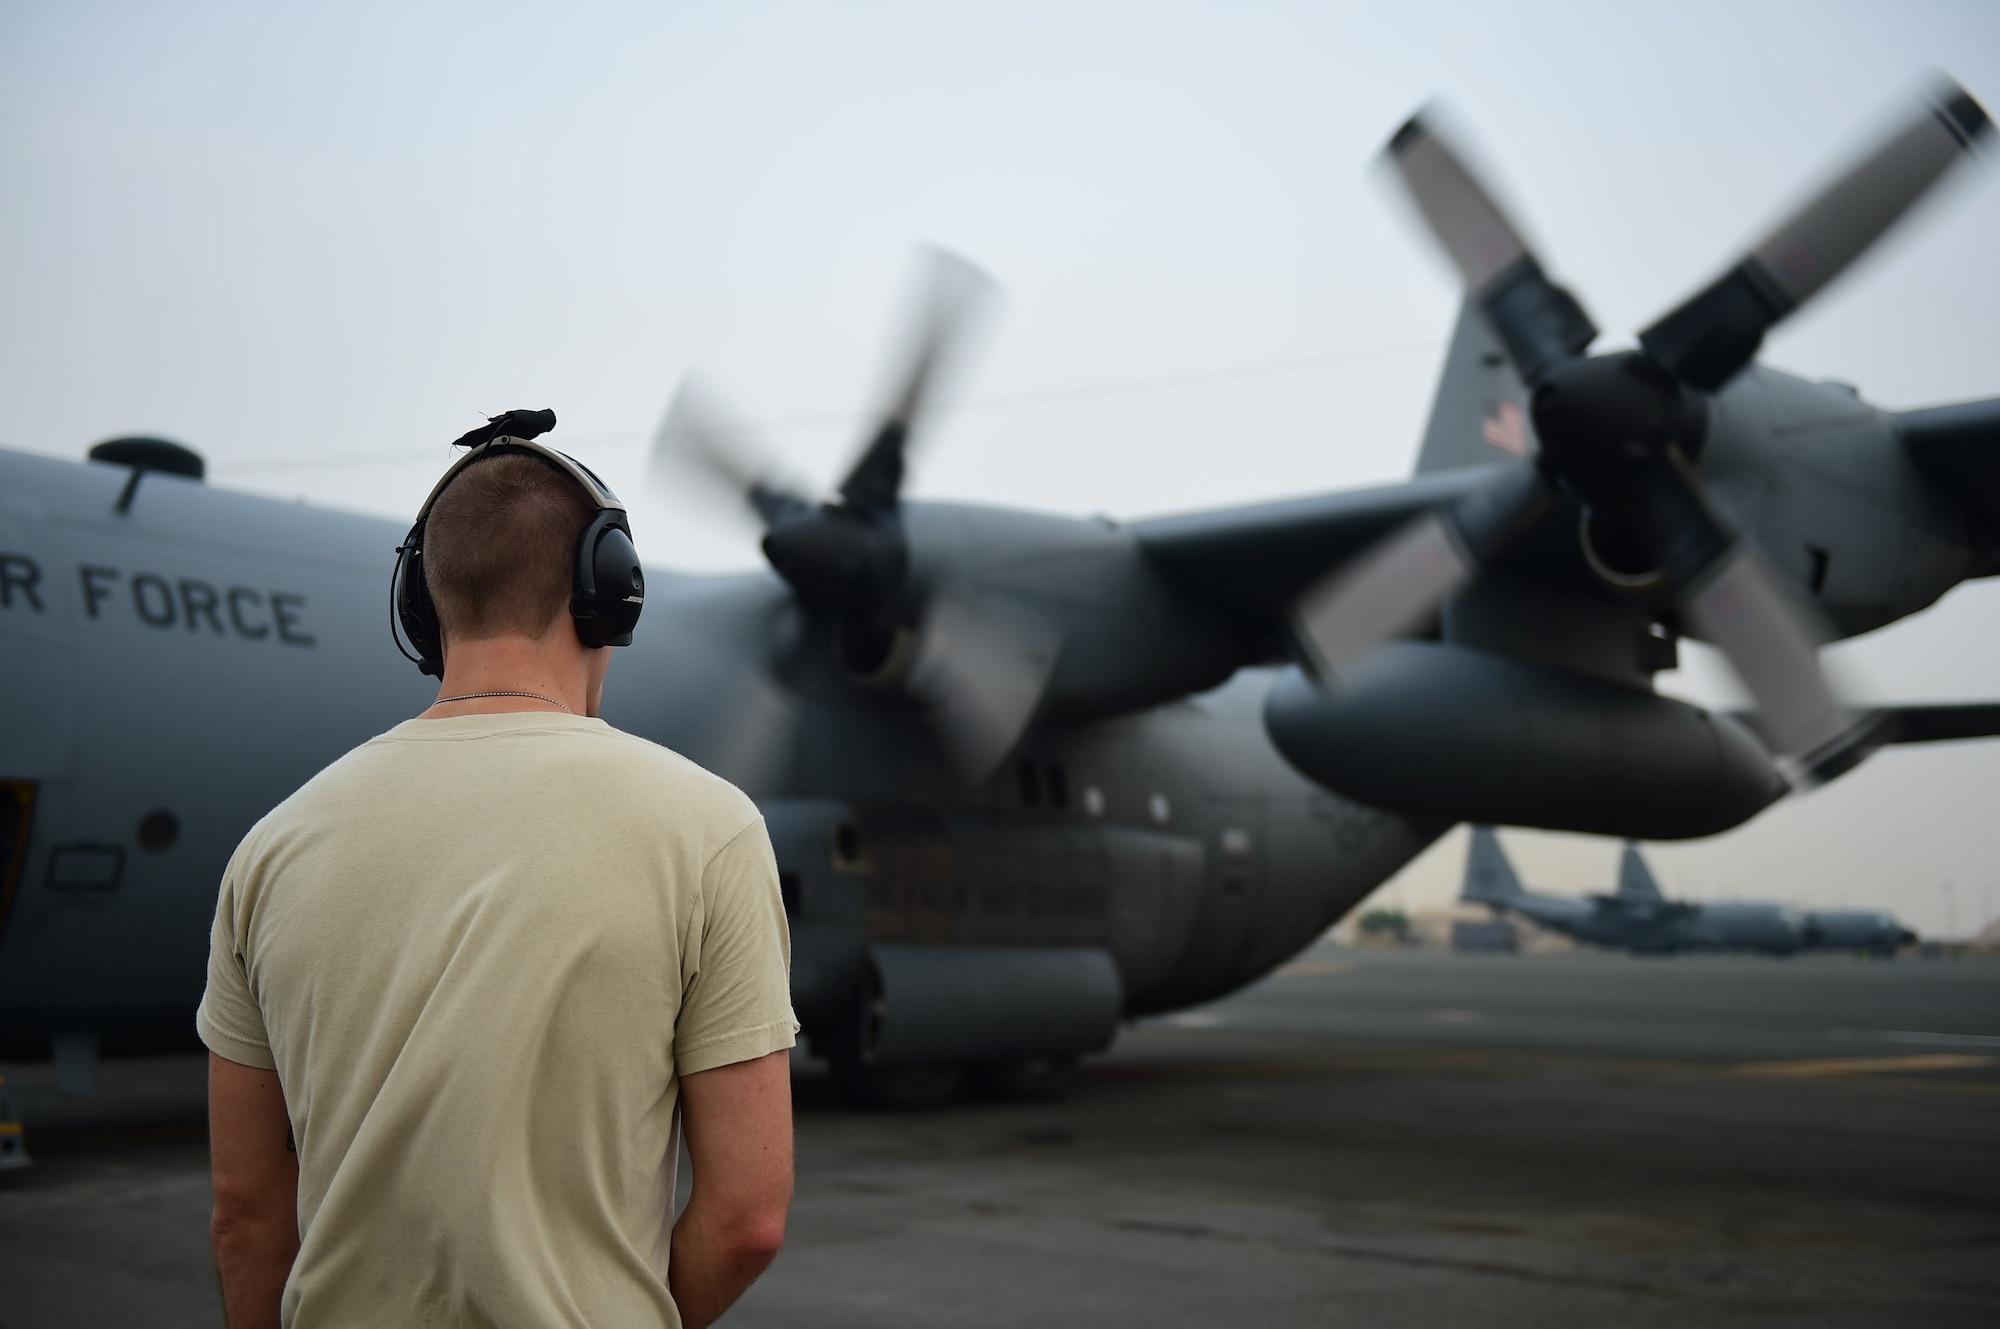 Senior Airman Aaron Hayes, 737th Expeditionary Airlift Squadron loadmaster, conducts pre-flight checks at an undisclosed location in Southwest Asia, Oct. 29, 2015. The 737th EAS mission is to provide airlift support throughout the area of responsibility for Operation INHERENT RESOLVE. (U.S. Air Force photo by Staff Sgt. Jerilyn Quintanilla)